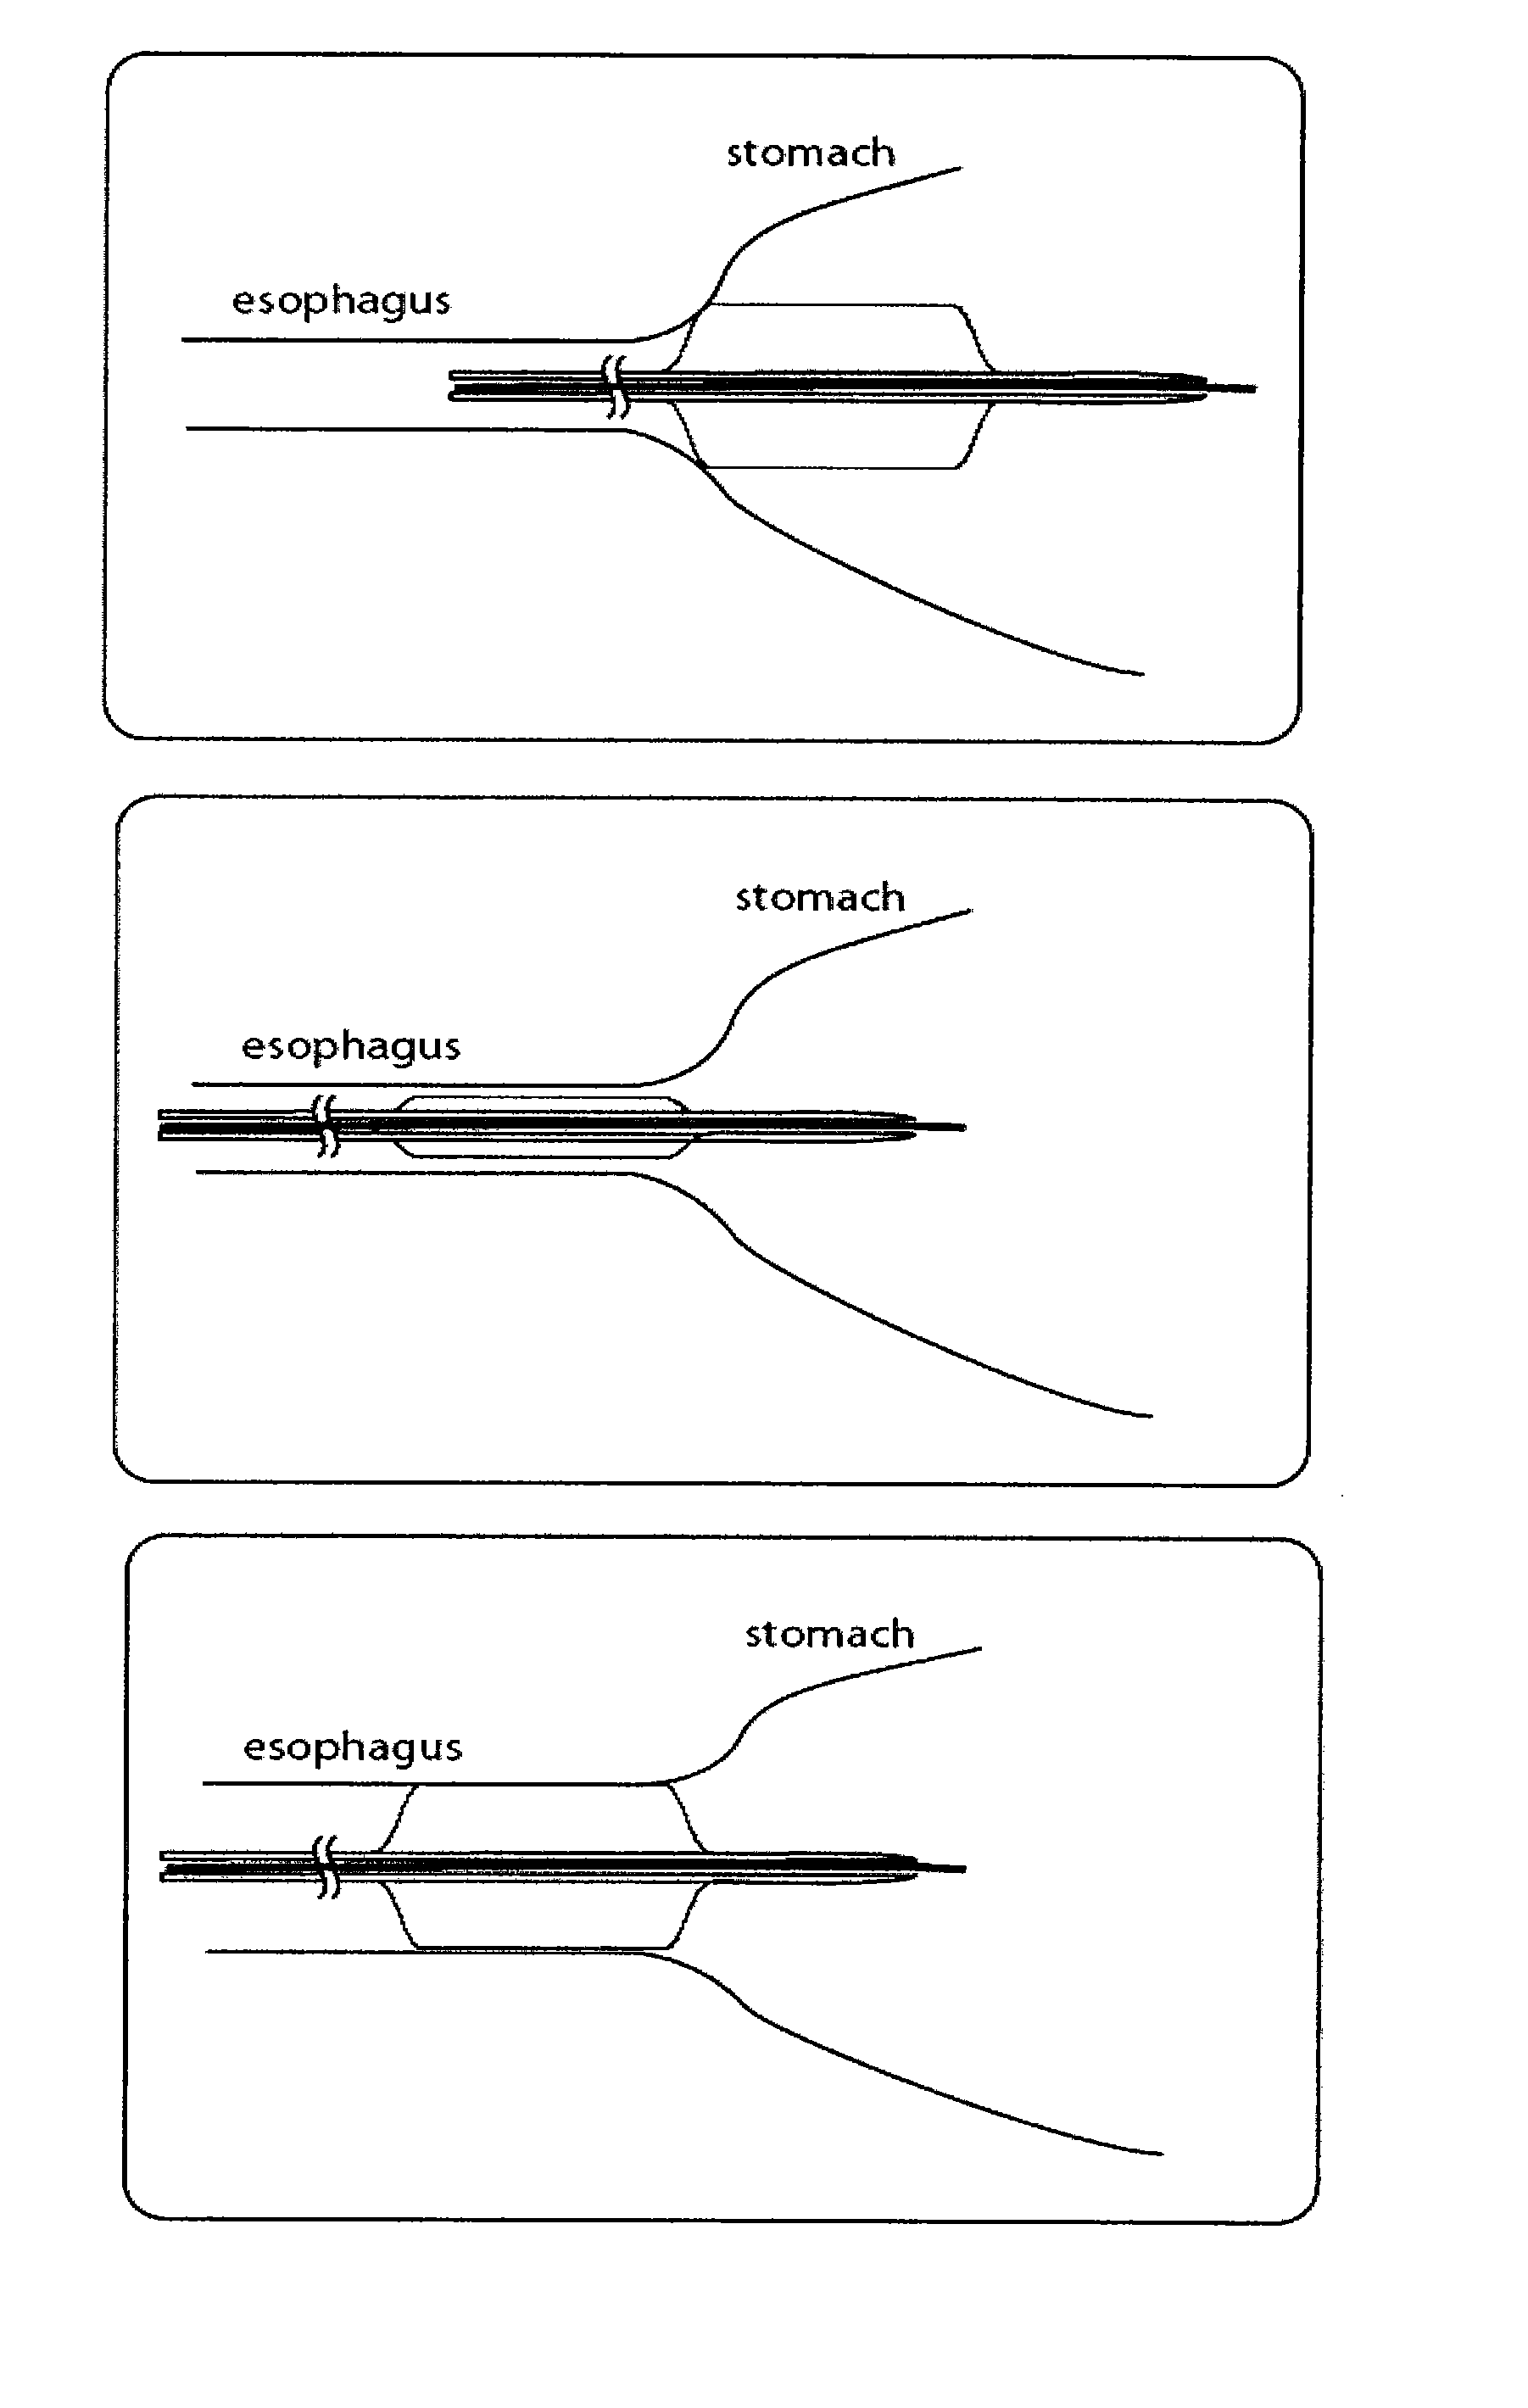 Methods and systems for optical imaging or epithelial luminal organs by beam scanning thereof